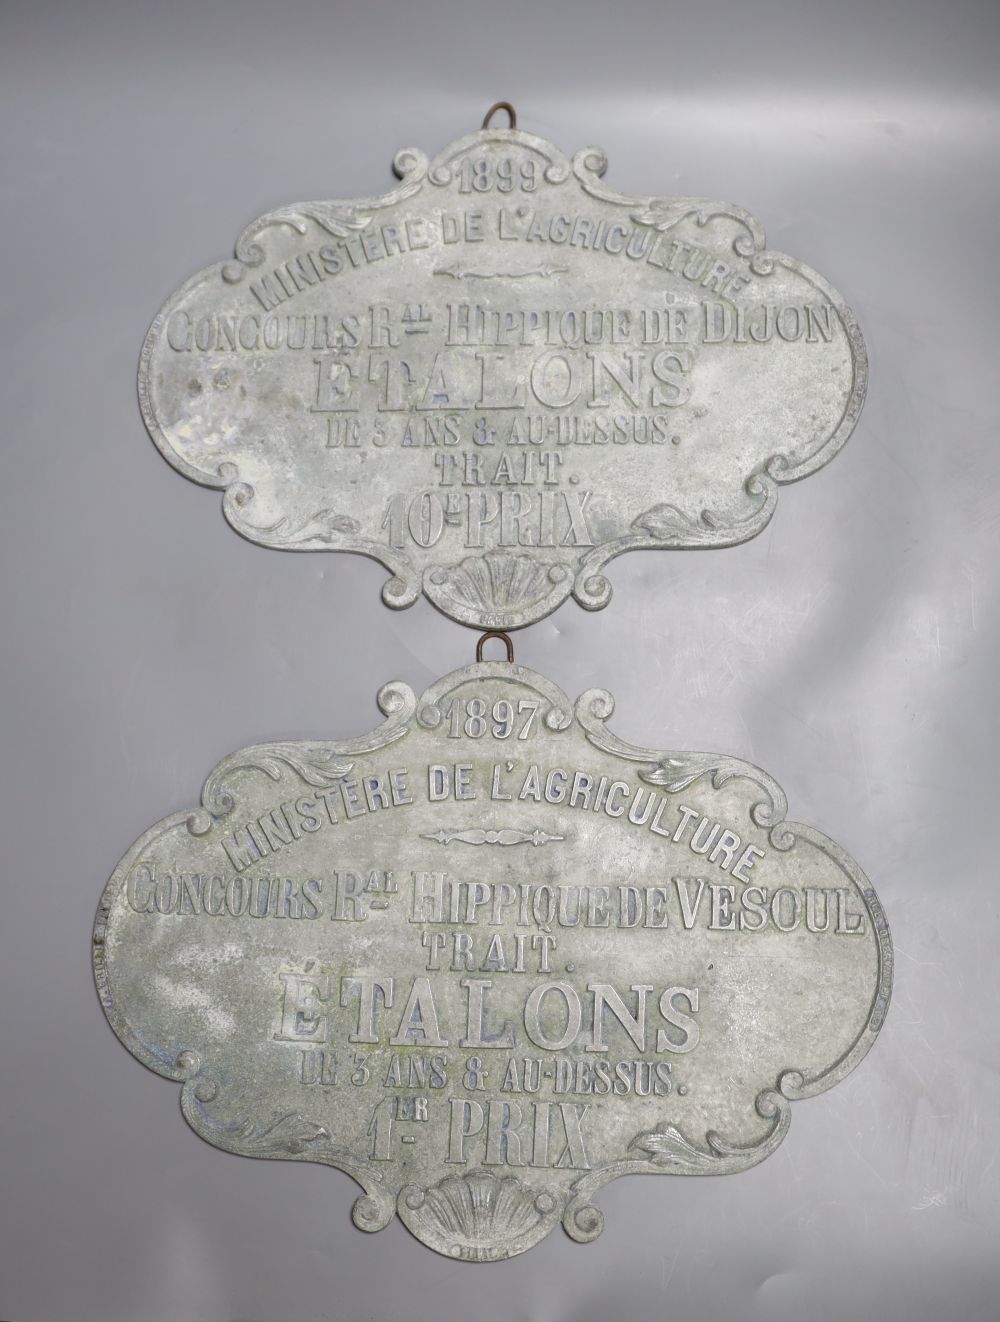 Two late 19th century French Ministere de lAgriculture plaques, length 35cm